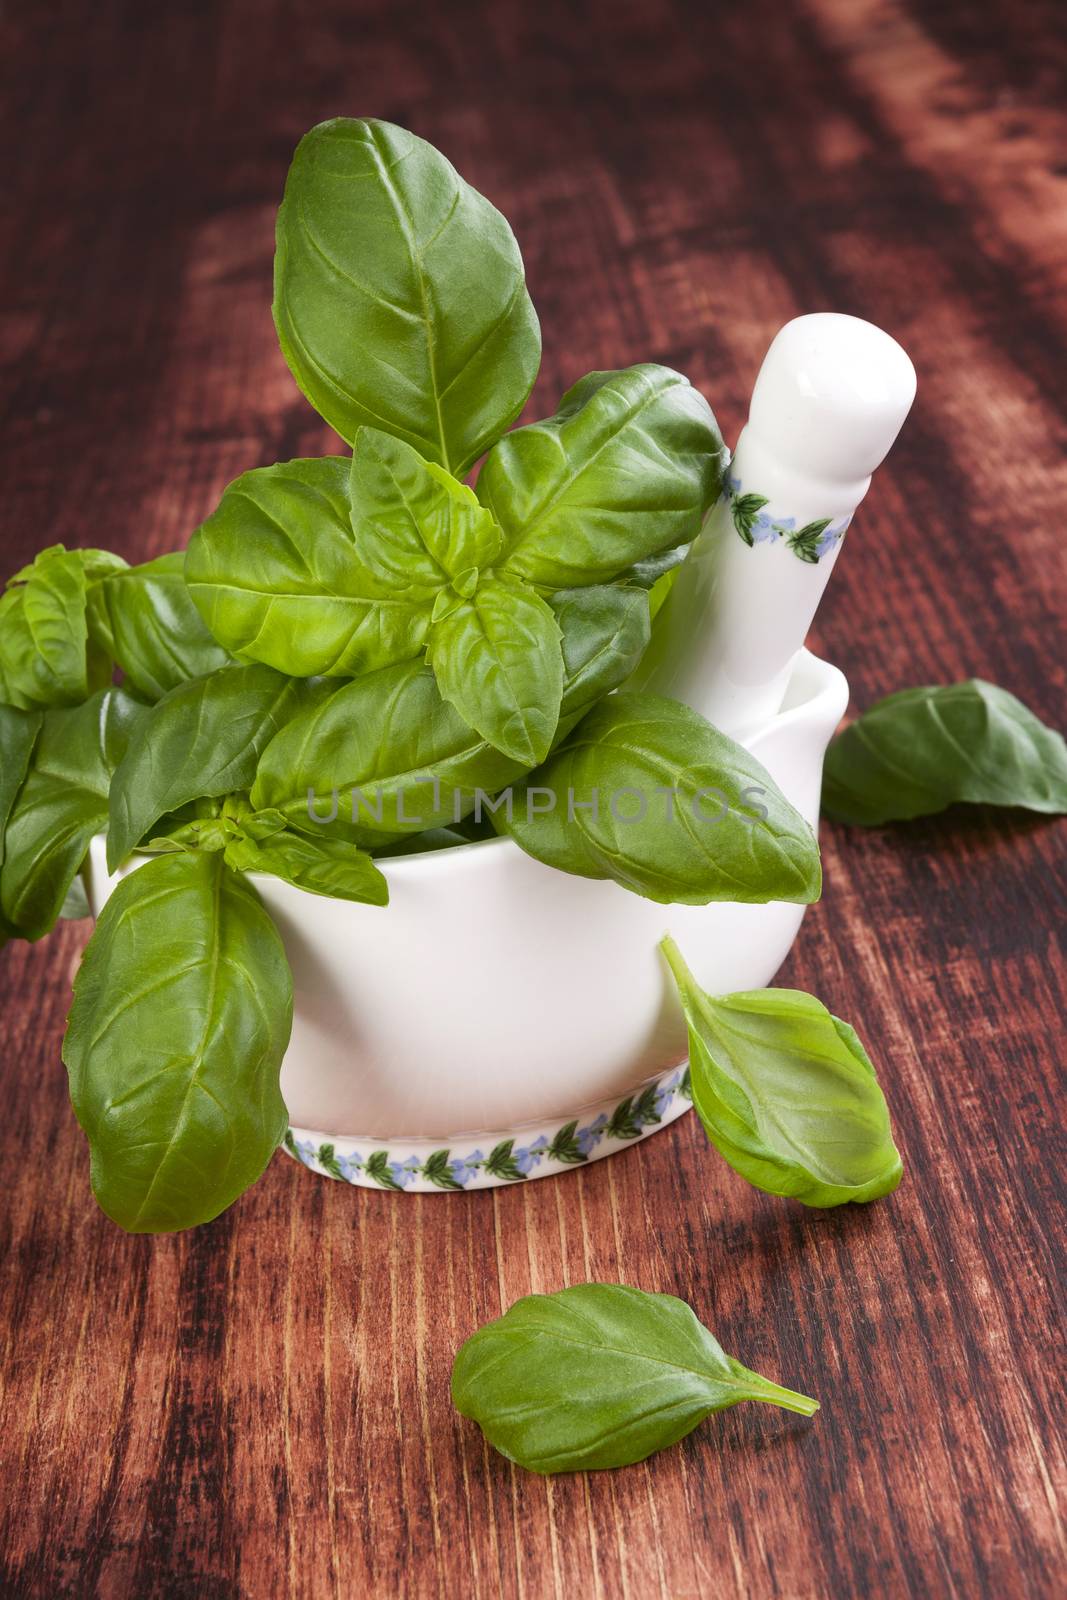 Basil. Culinary herbs. Fresh basil bunch in mortar with pestle on brown wooden background. Traditional cooking, rustic style.